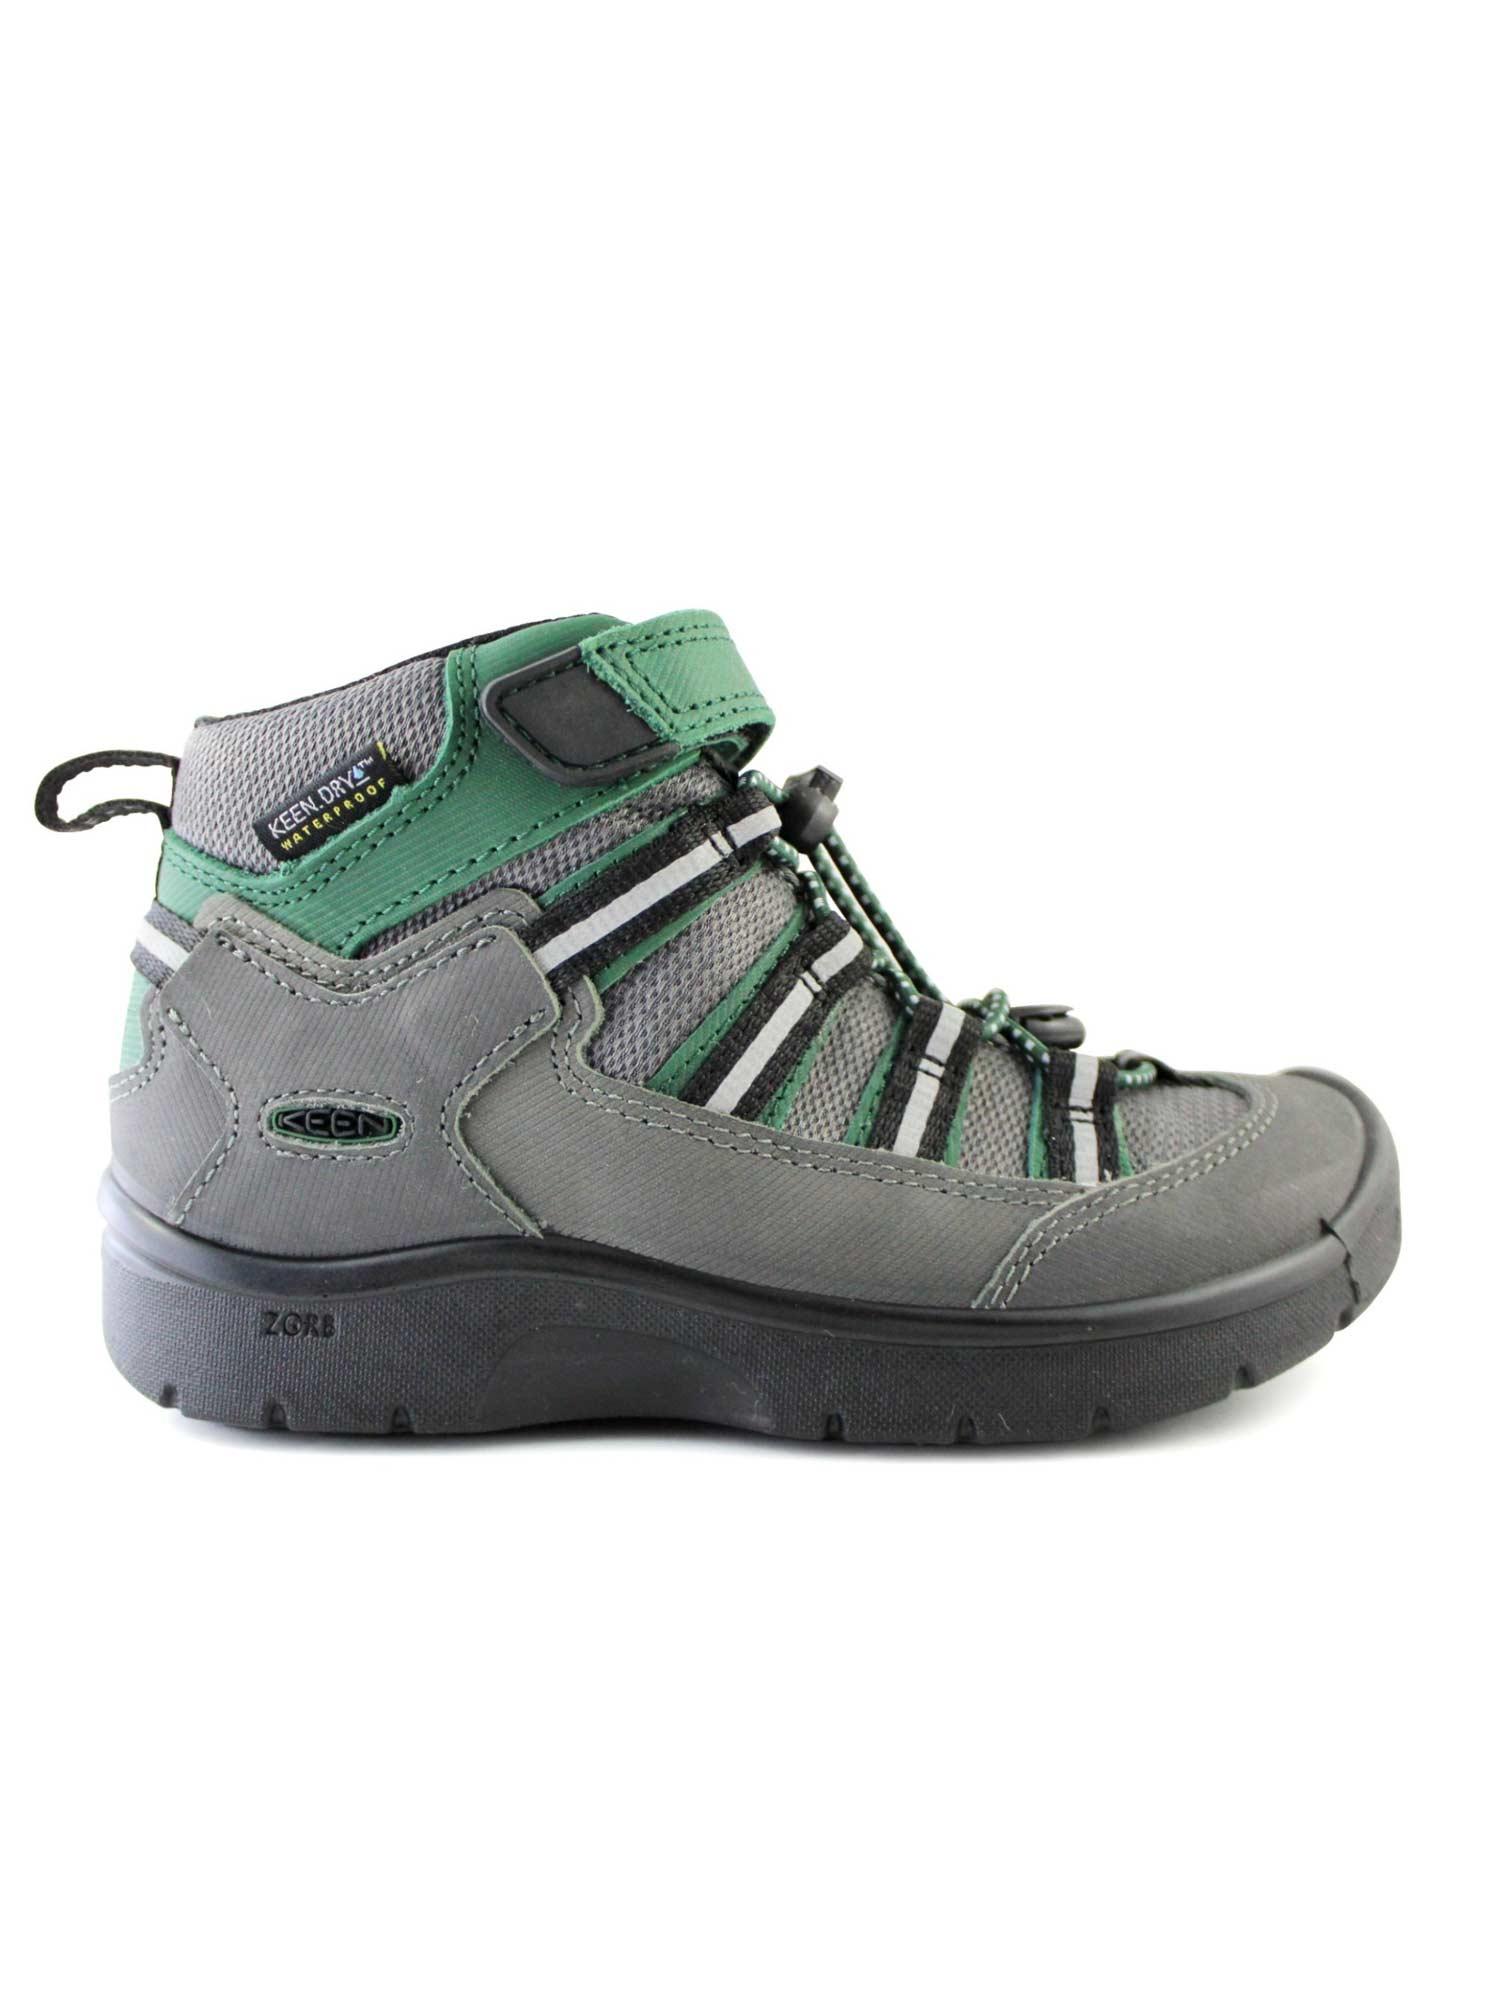 KEEN HIKEPORT 2 SPORT MID WP YOUTH Boots dečije sive